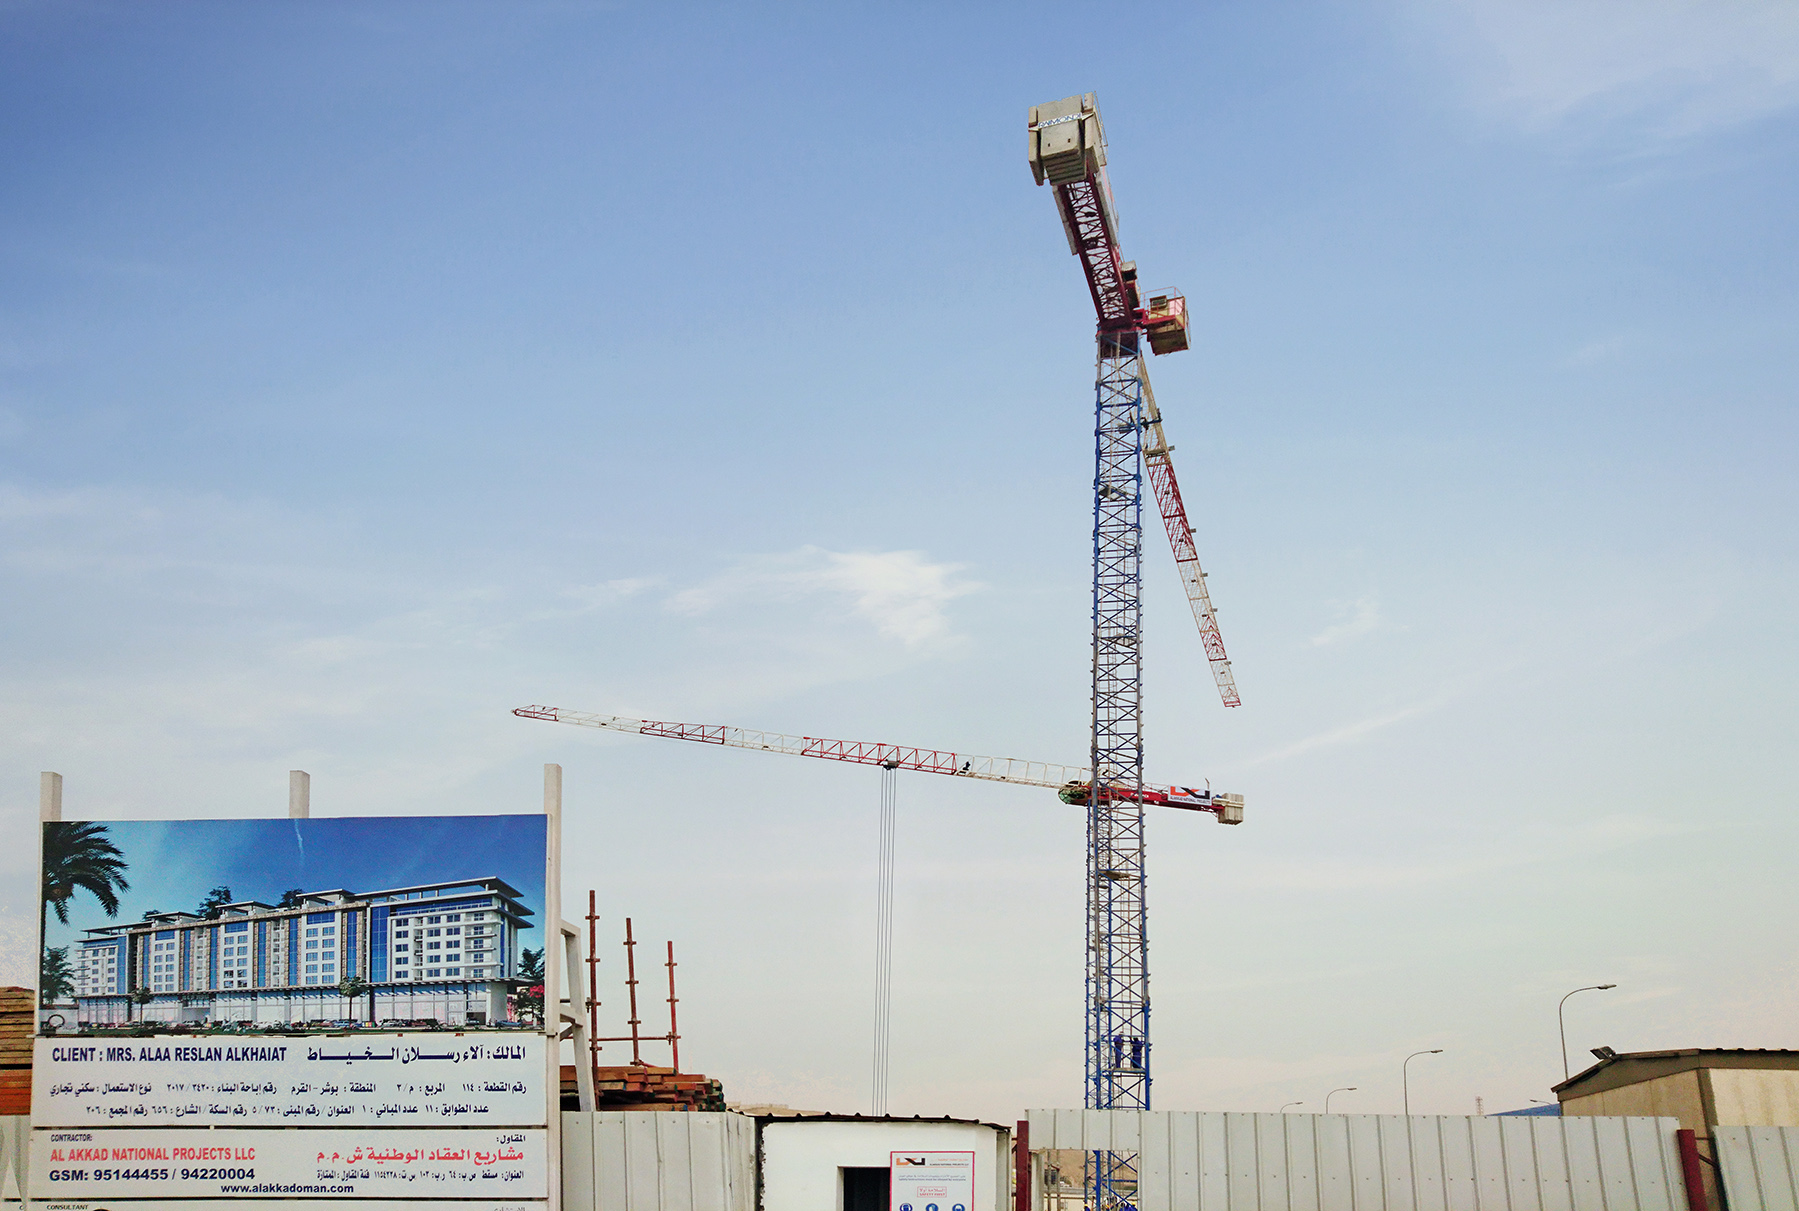 Two Raimondi MRT111 topless tower cranes put to work at new upscale development in Muscat